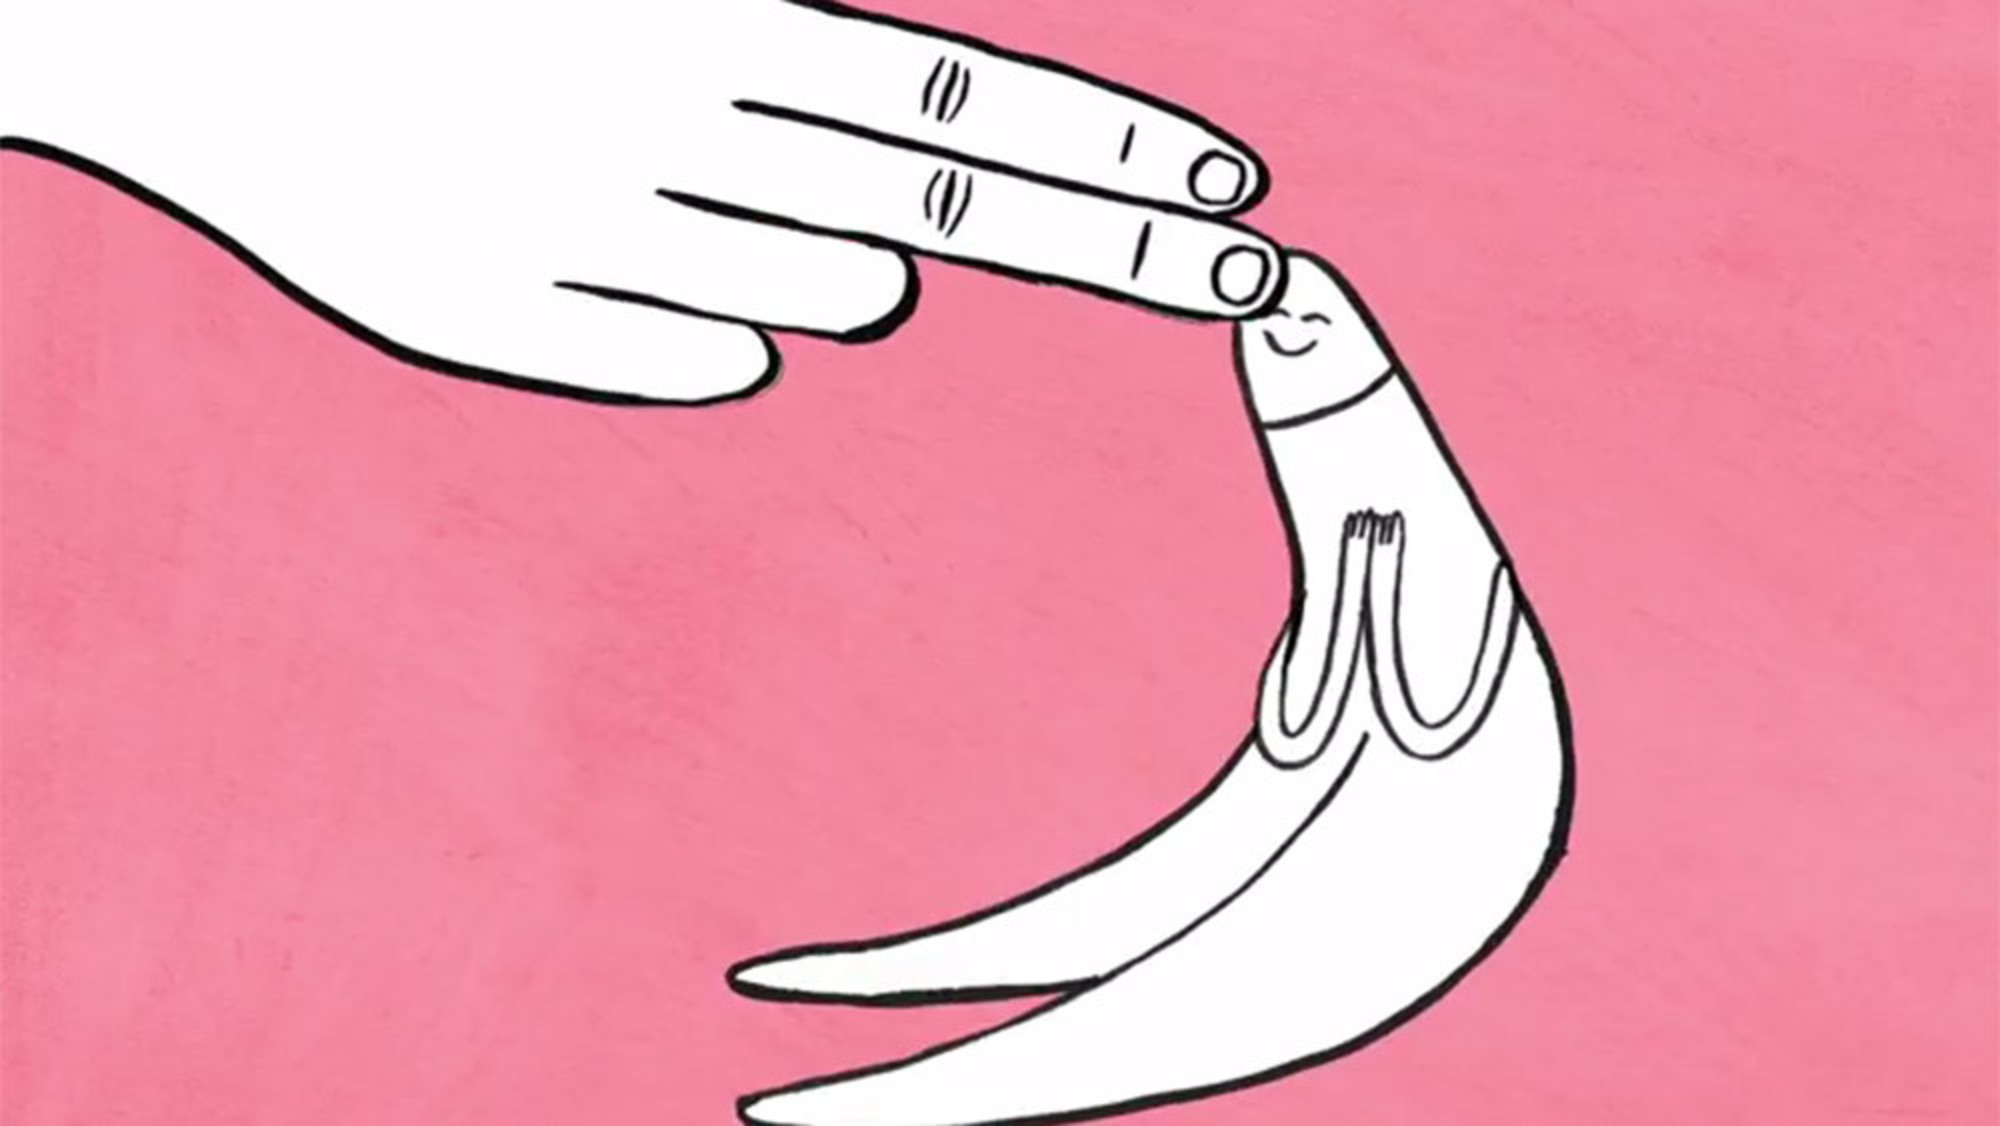 The clitoris is there solely for a woman's pleasure [Credit: Aeon]